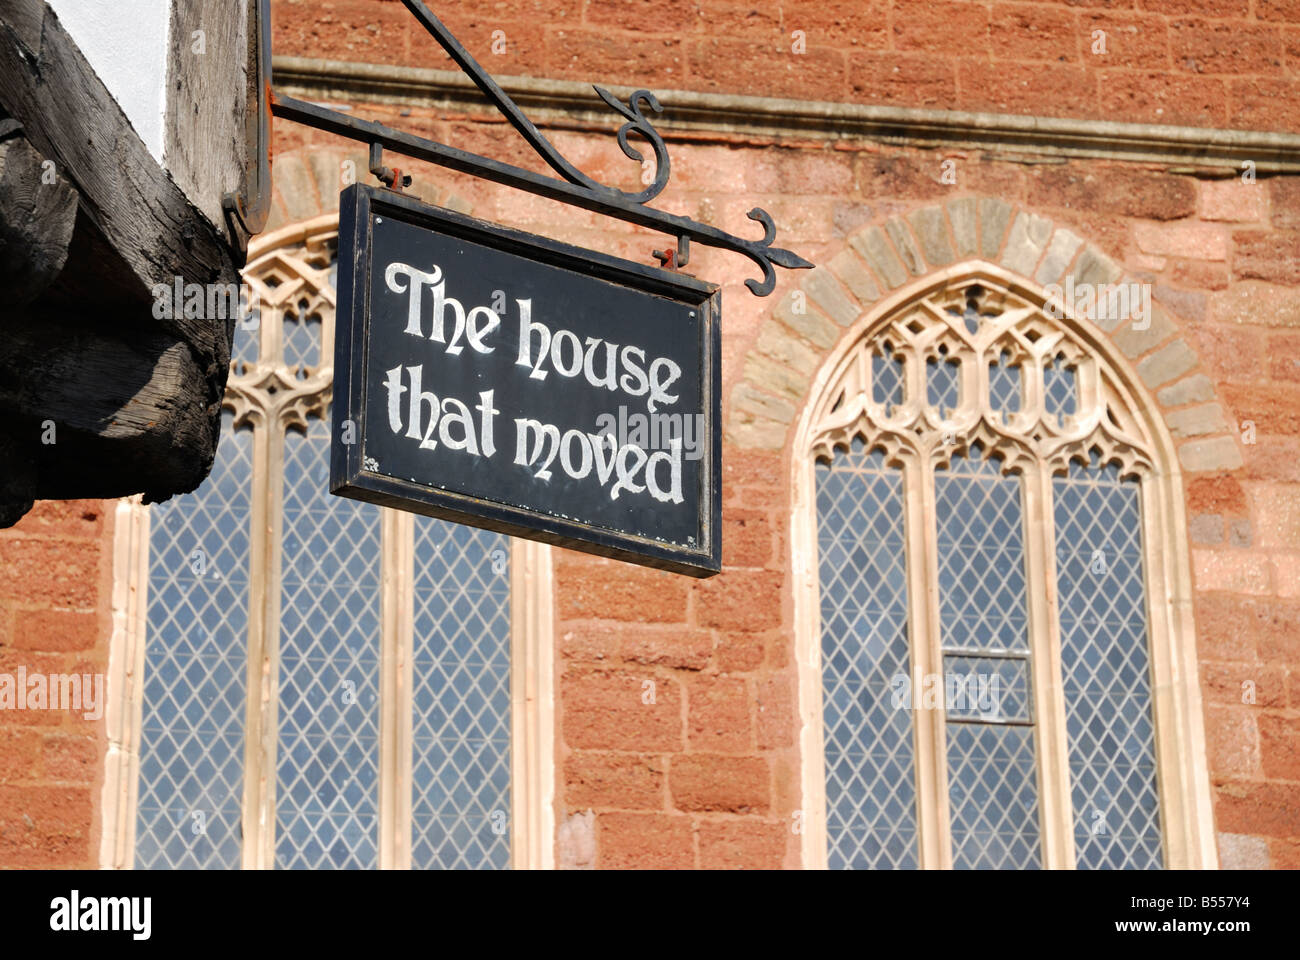 Exeter, Devon, UK. The House That Moved - famous Elizabethan house, moved to accommodate a ring road Stock Photo